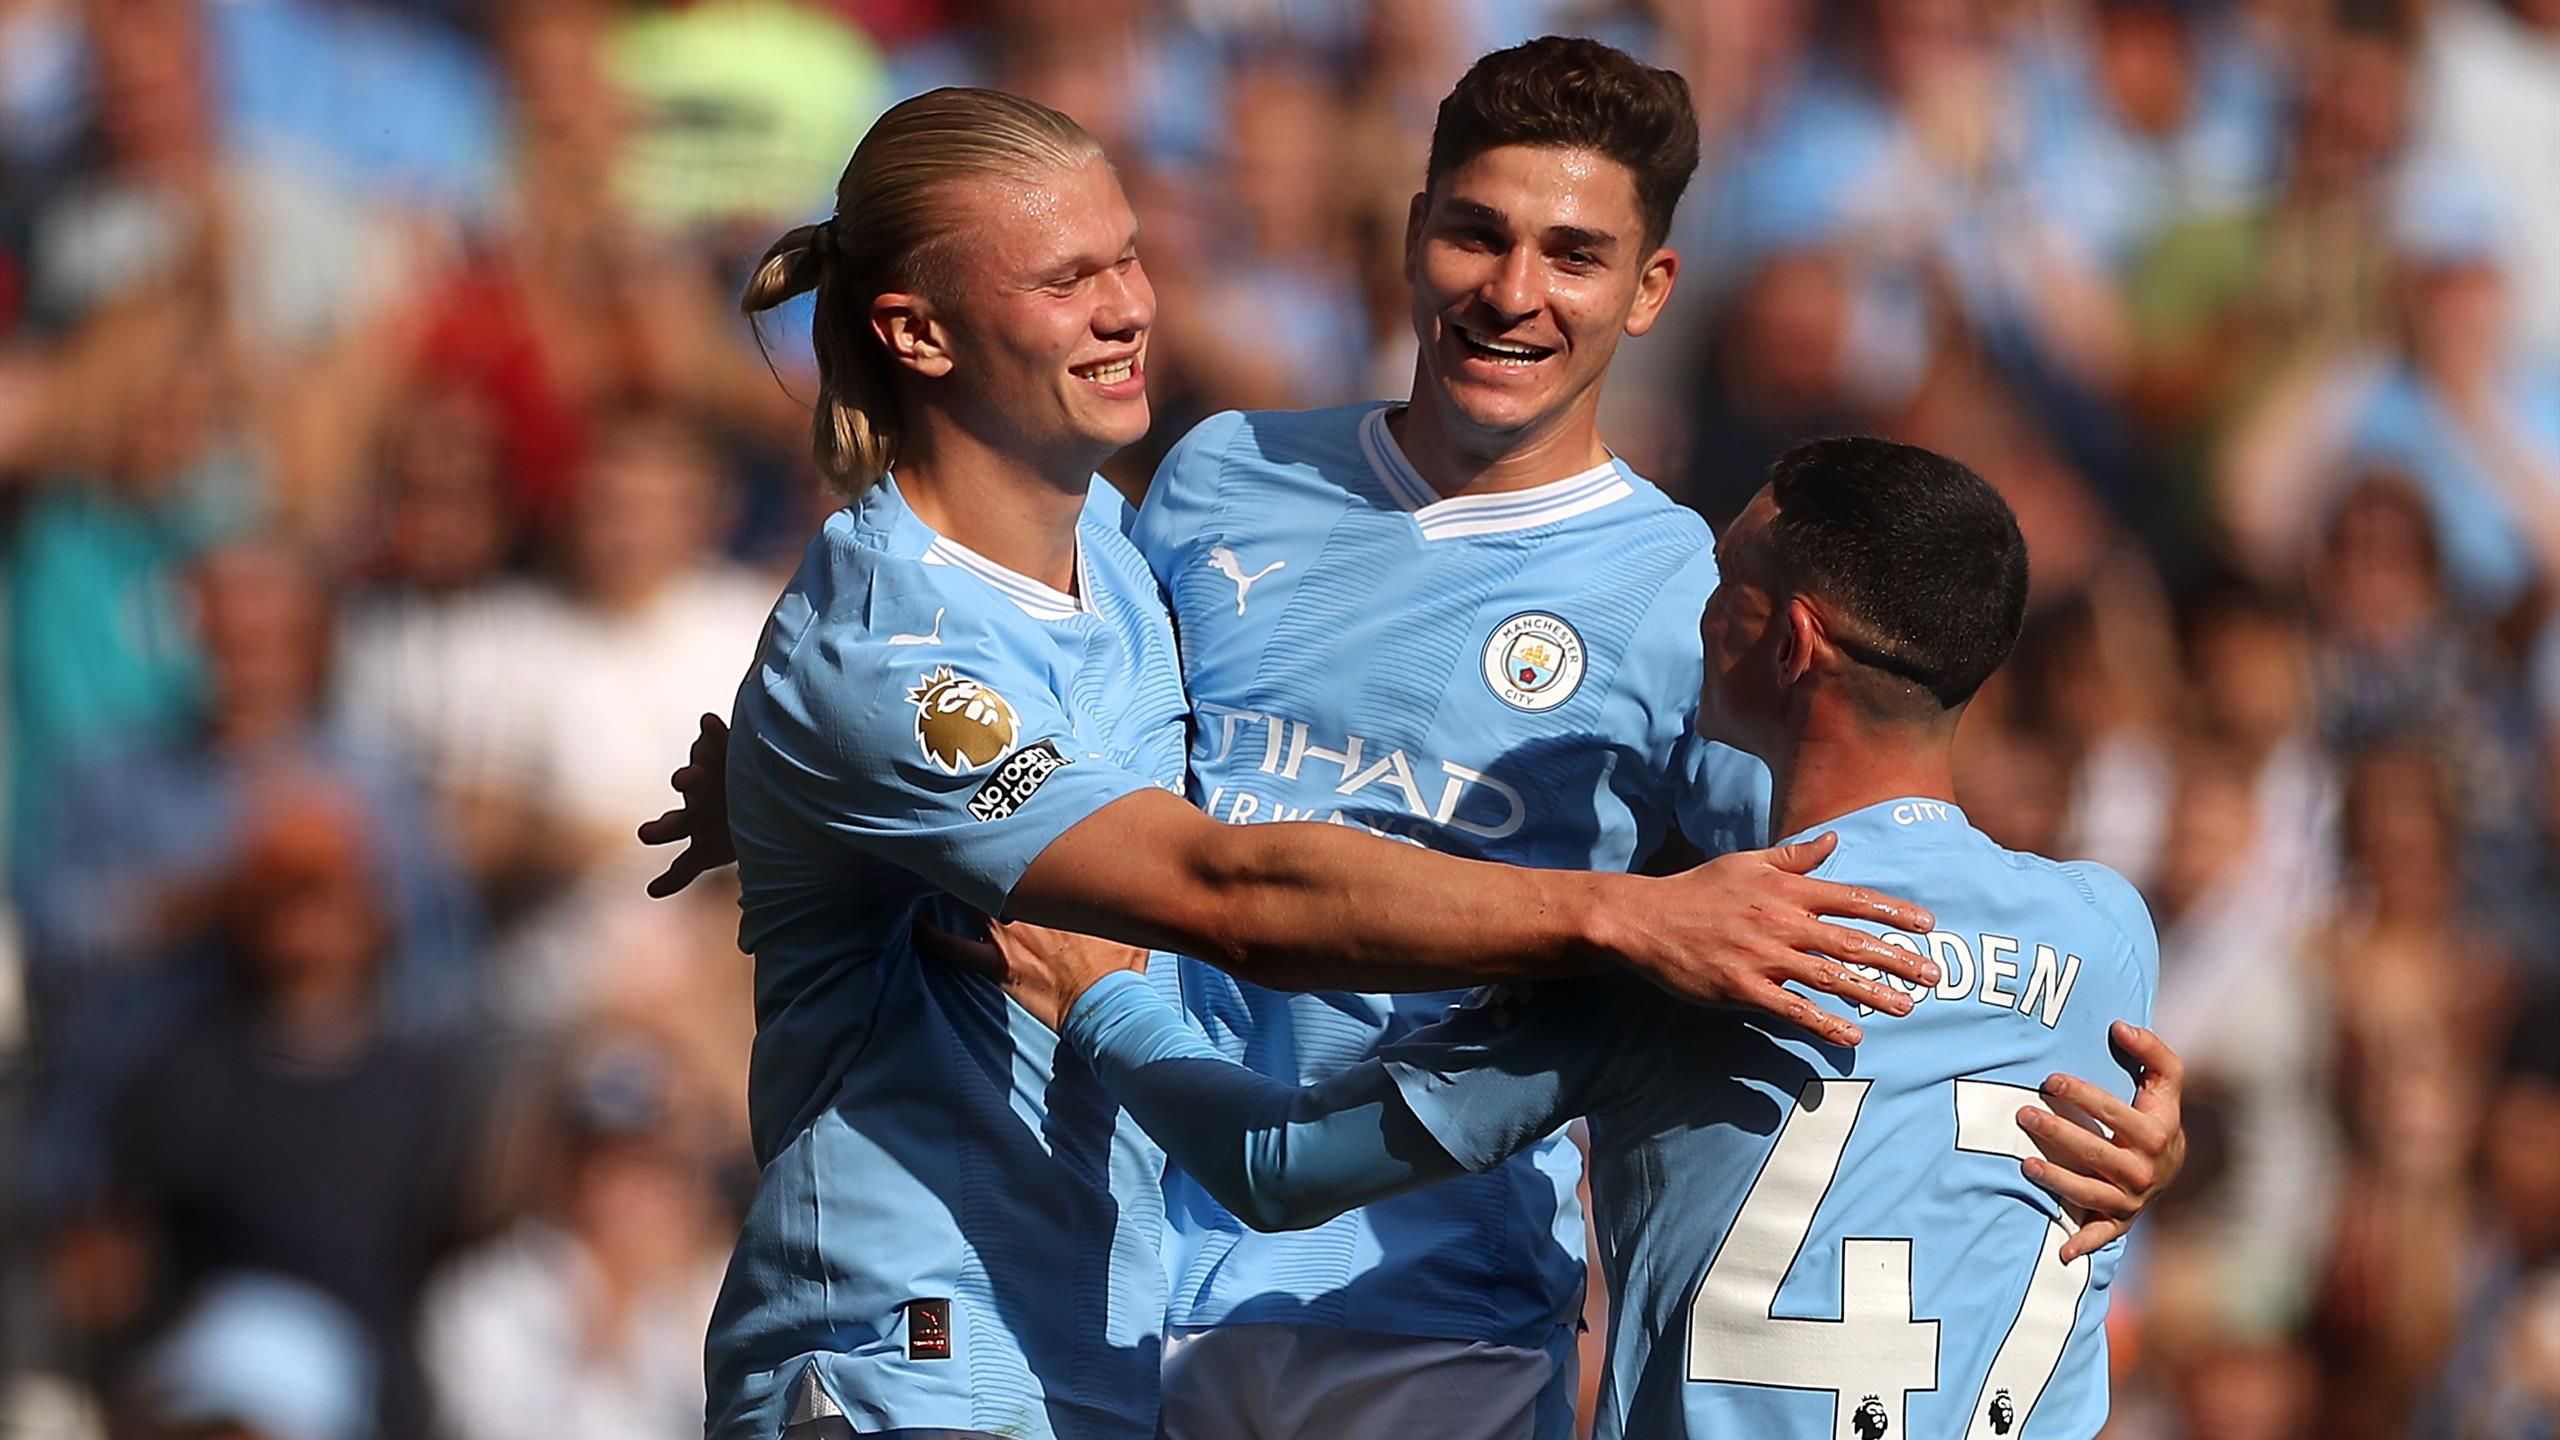 Manchester City 5-1 Fulham Erling Haaland fires second-half hat-trick as Citizens remain perfect with convincing win